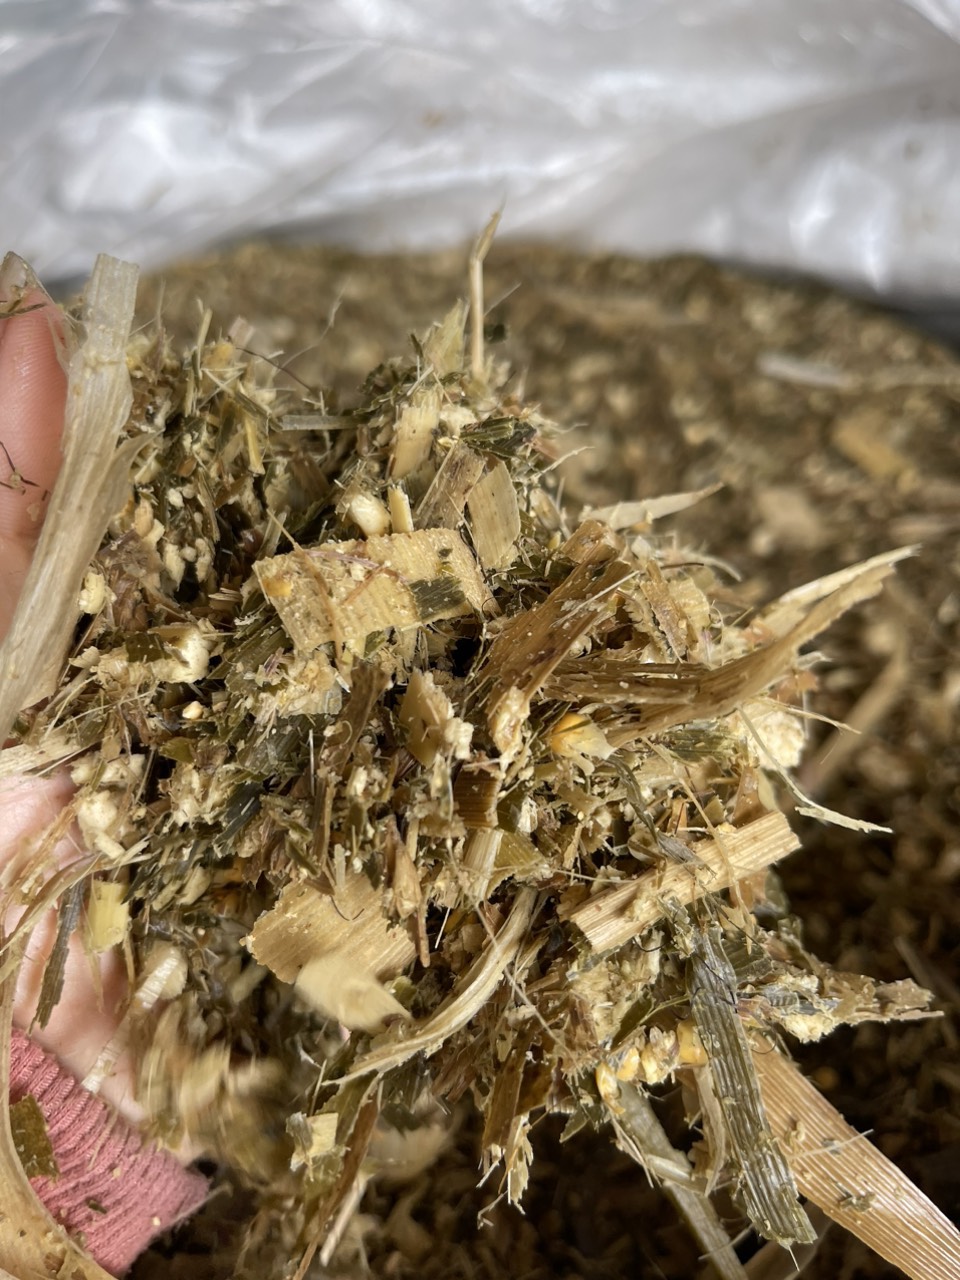 What is corn silage?